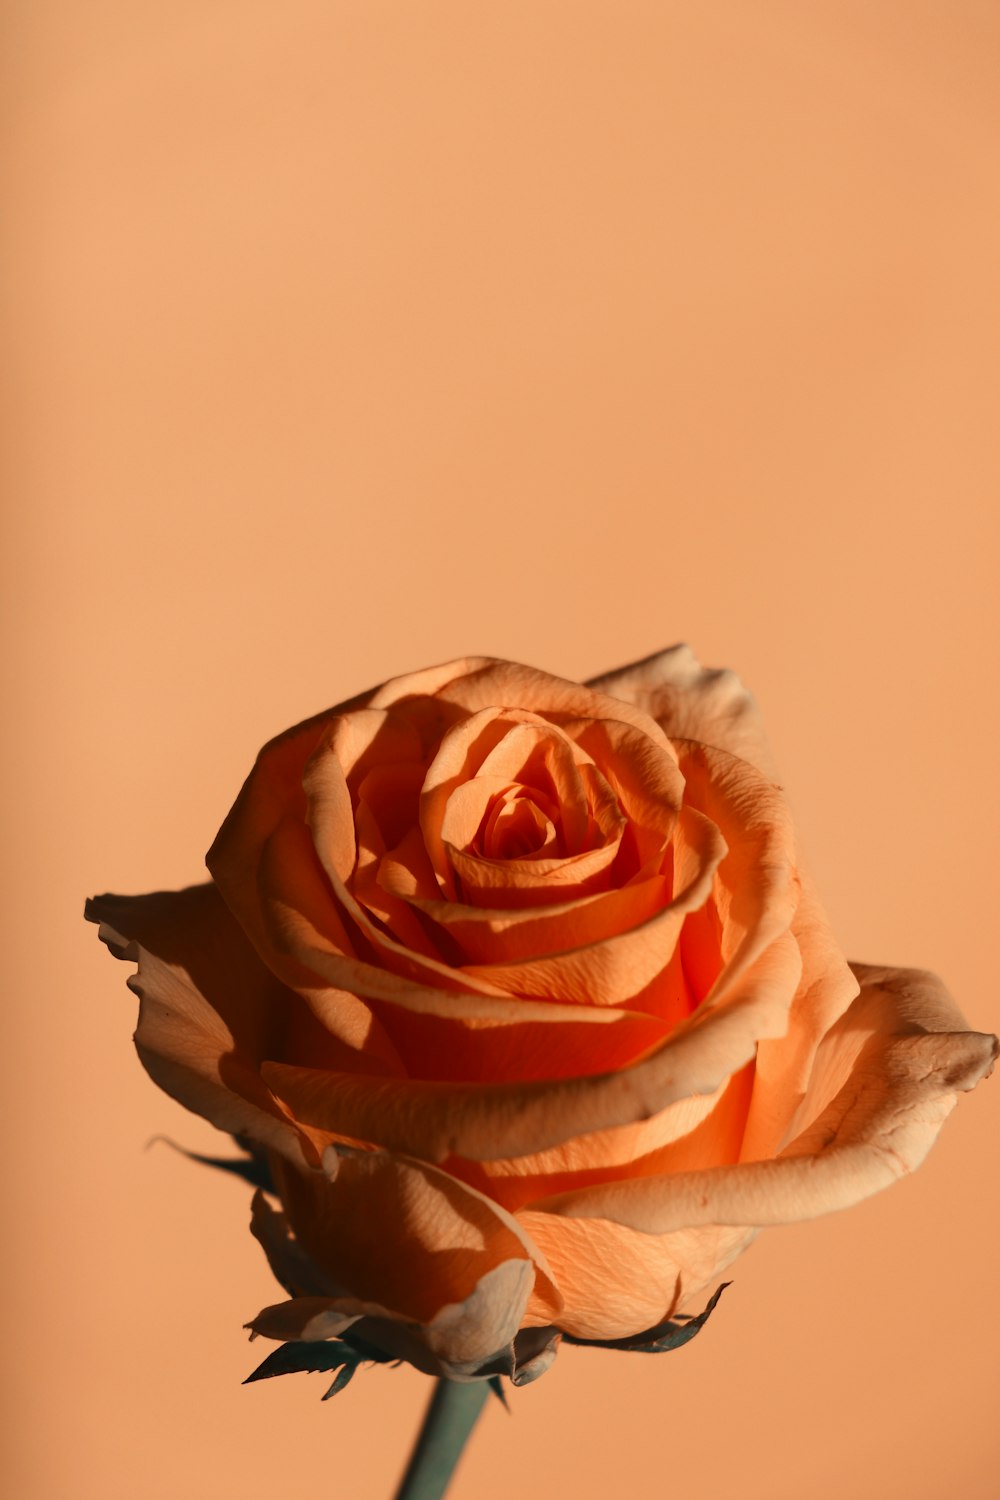 pink and white rose in close up photography